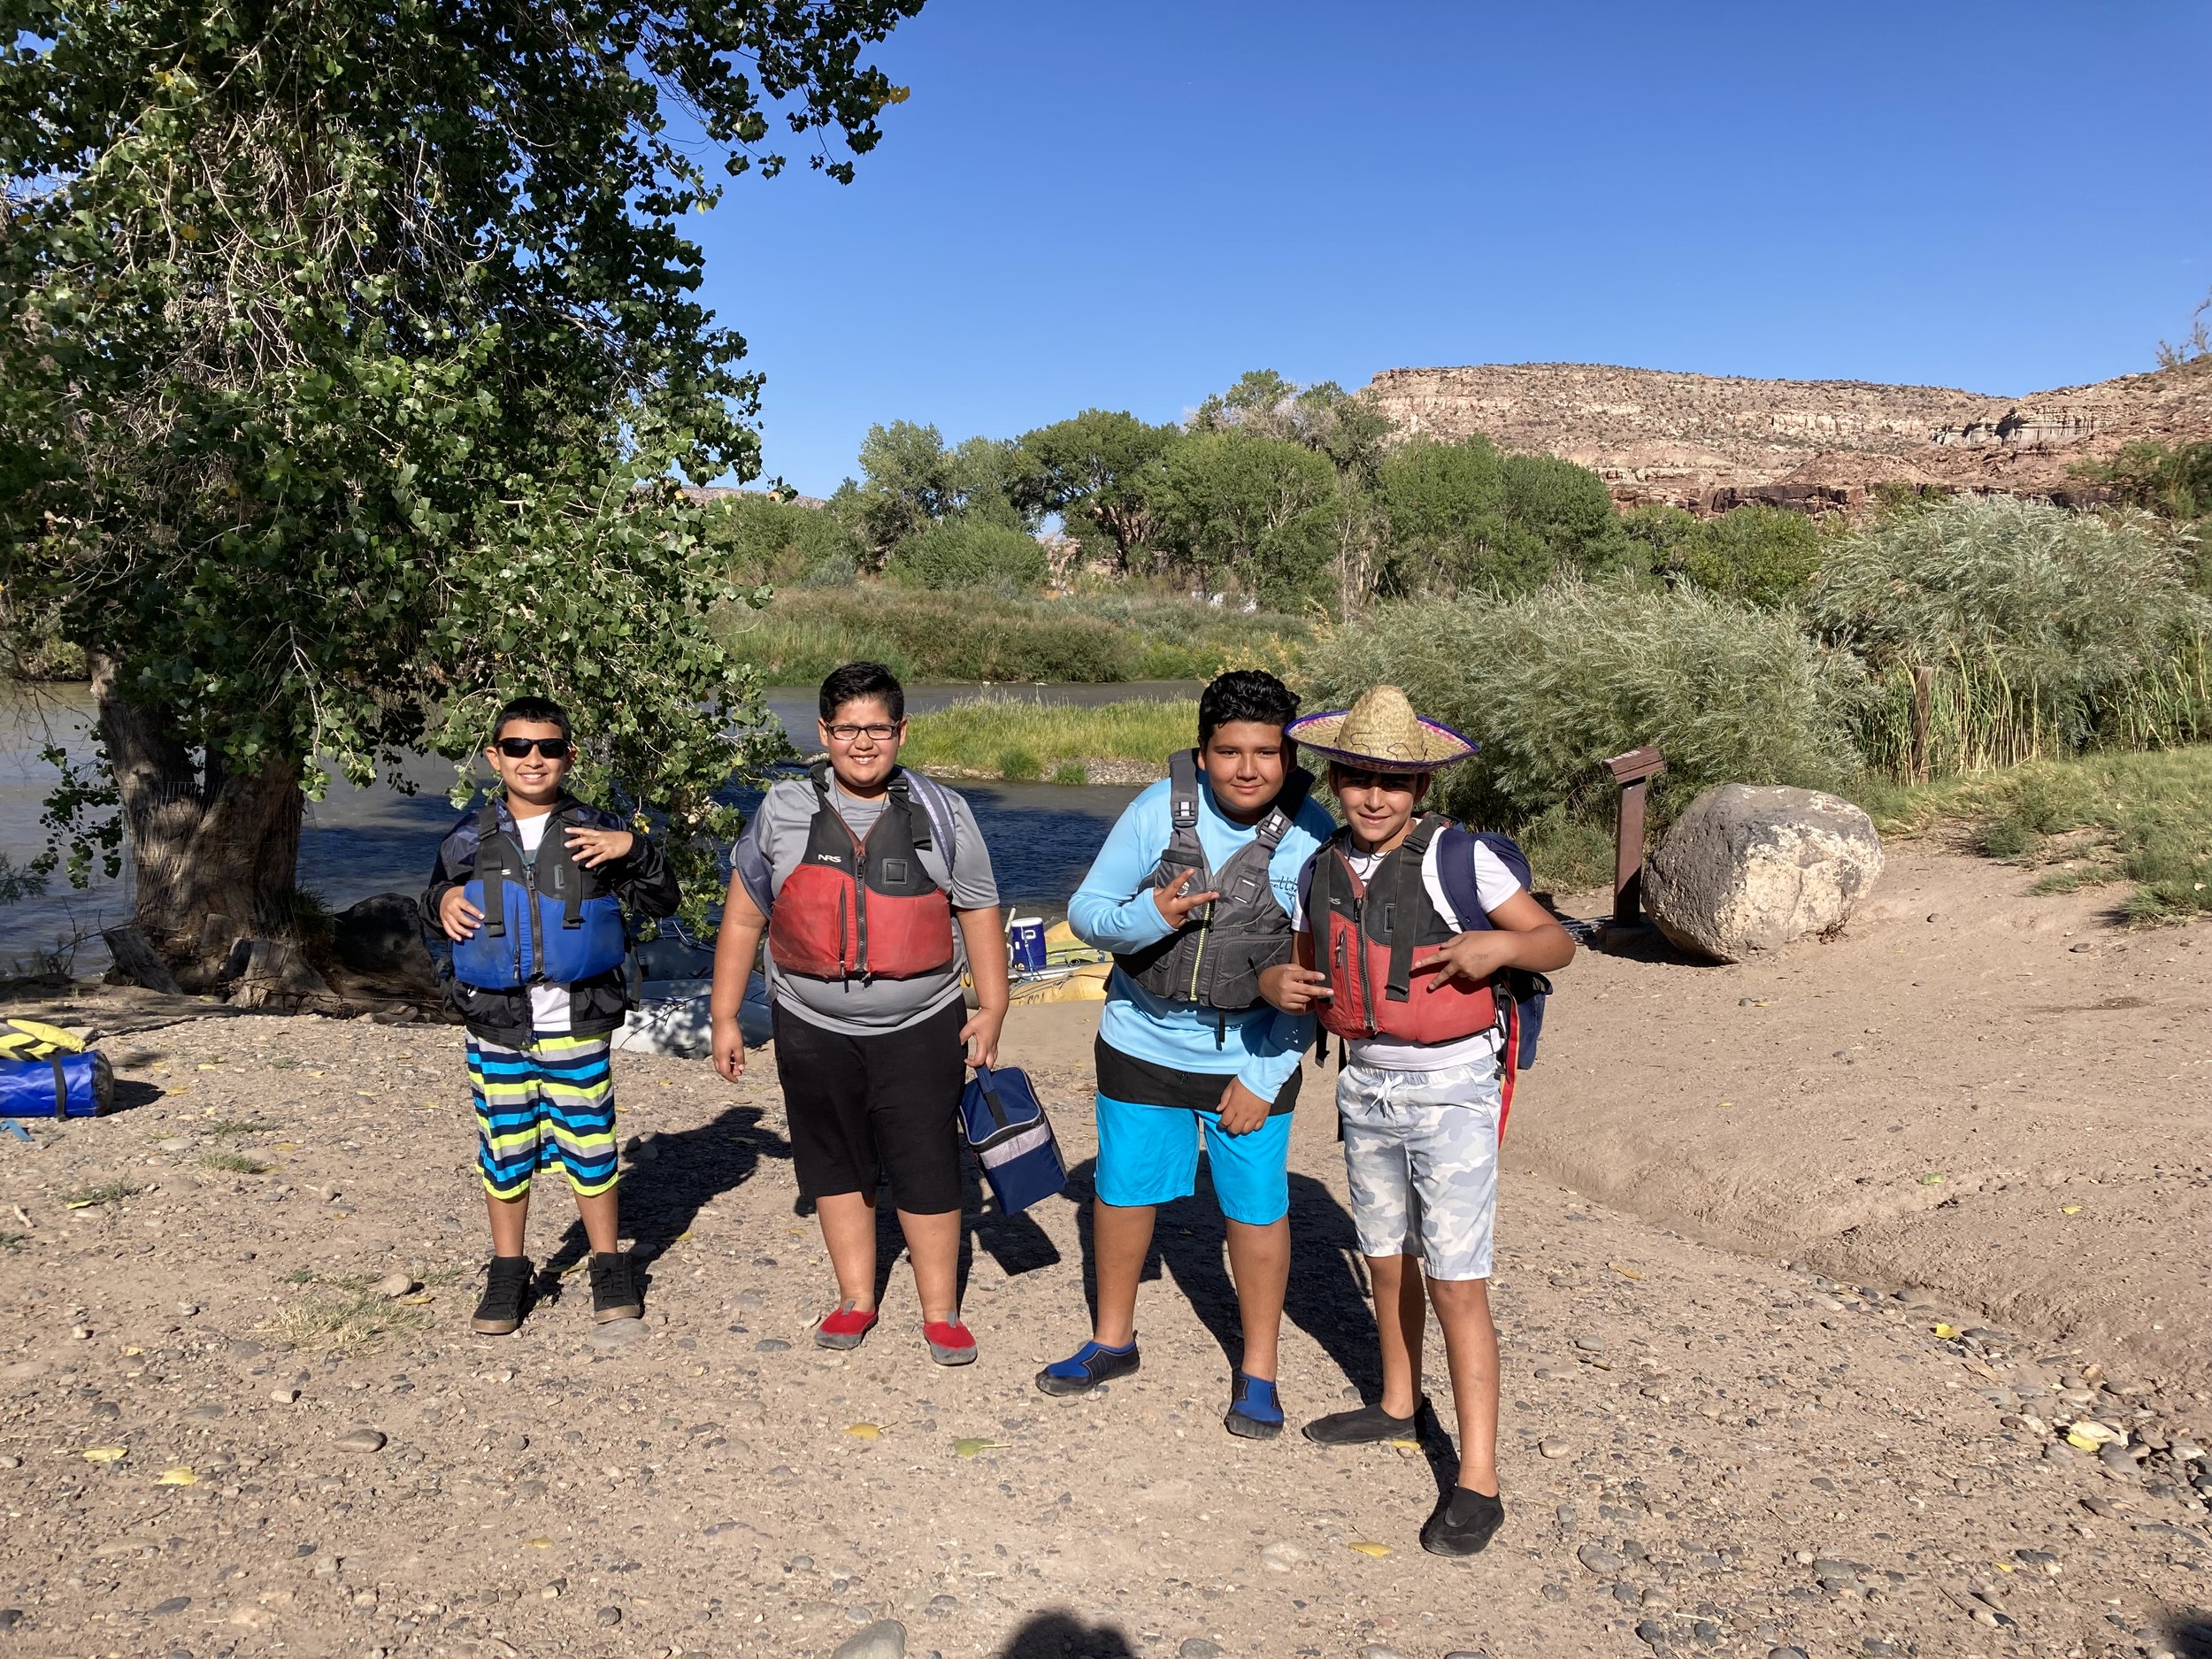  For many students, this was their first rafting trip. CCA strives to make every trip fun, memorable, and educational - we want every kid to go home with long-lasting memories! 